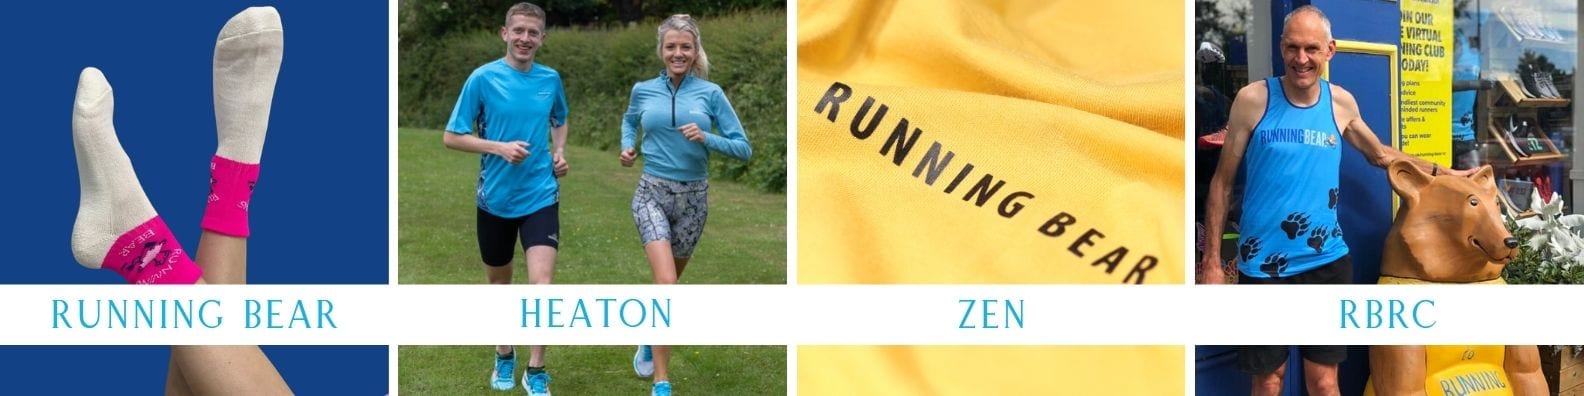 Running Bear Best Running Clothing in the UK Sustainable athletic clothing options, unique legging print, best running socks-min